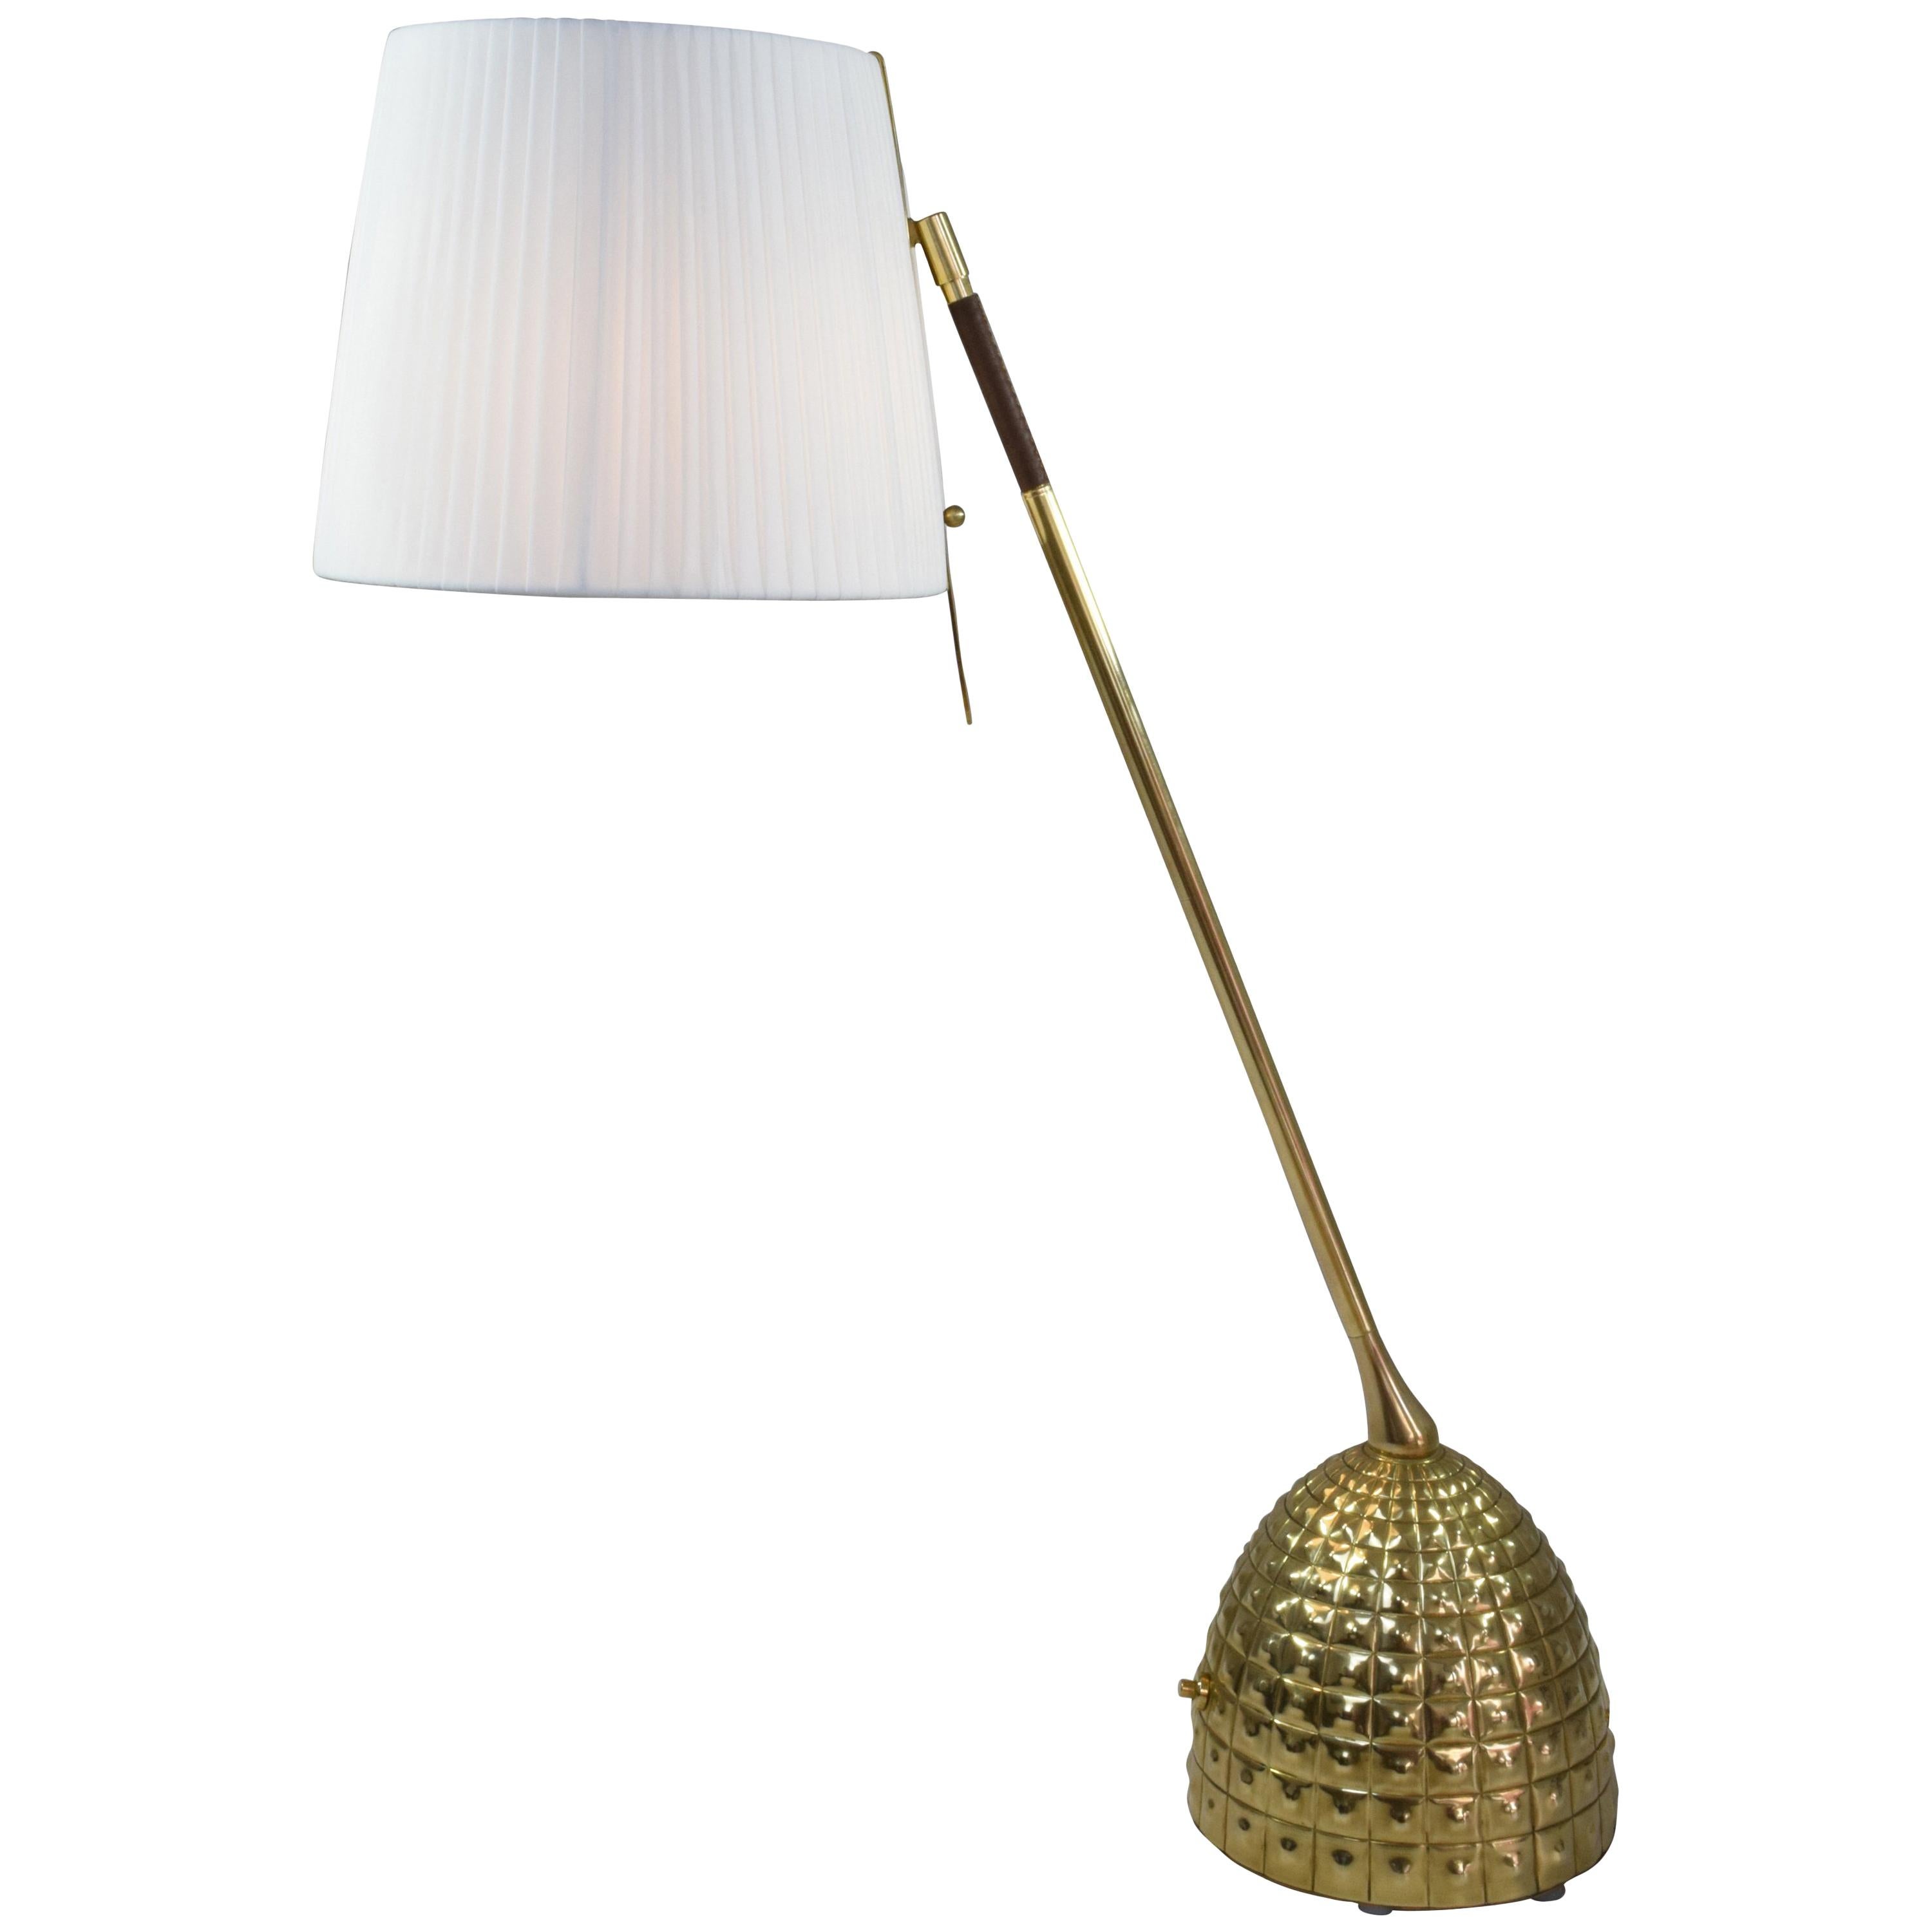 Infinitus-VI Tall Contemporary Brass Table Lamp, Flow Collection